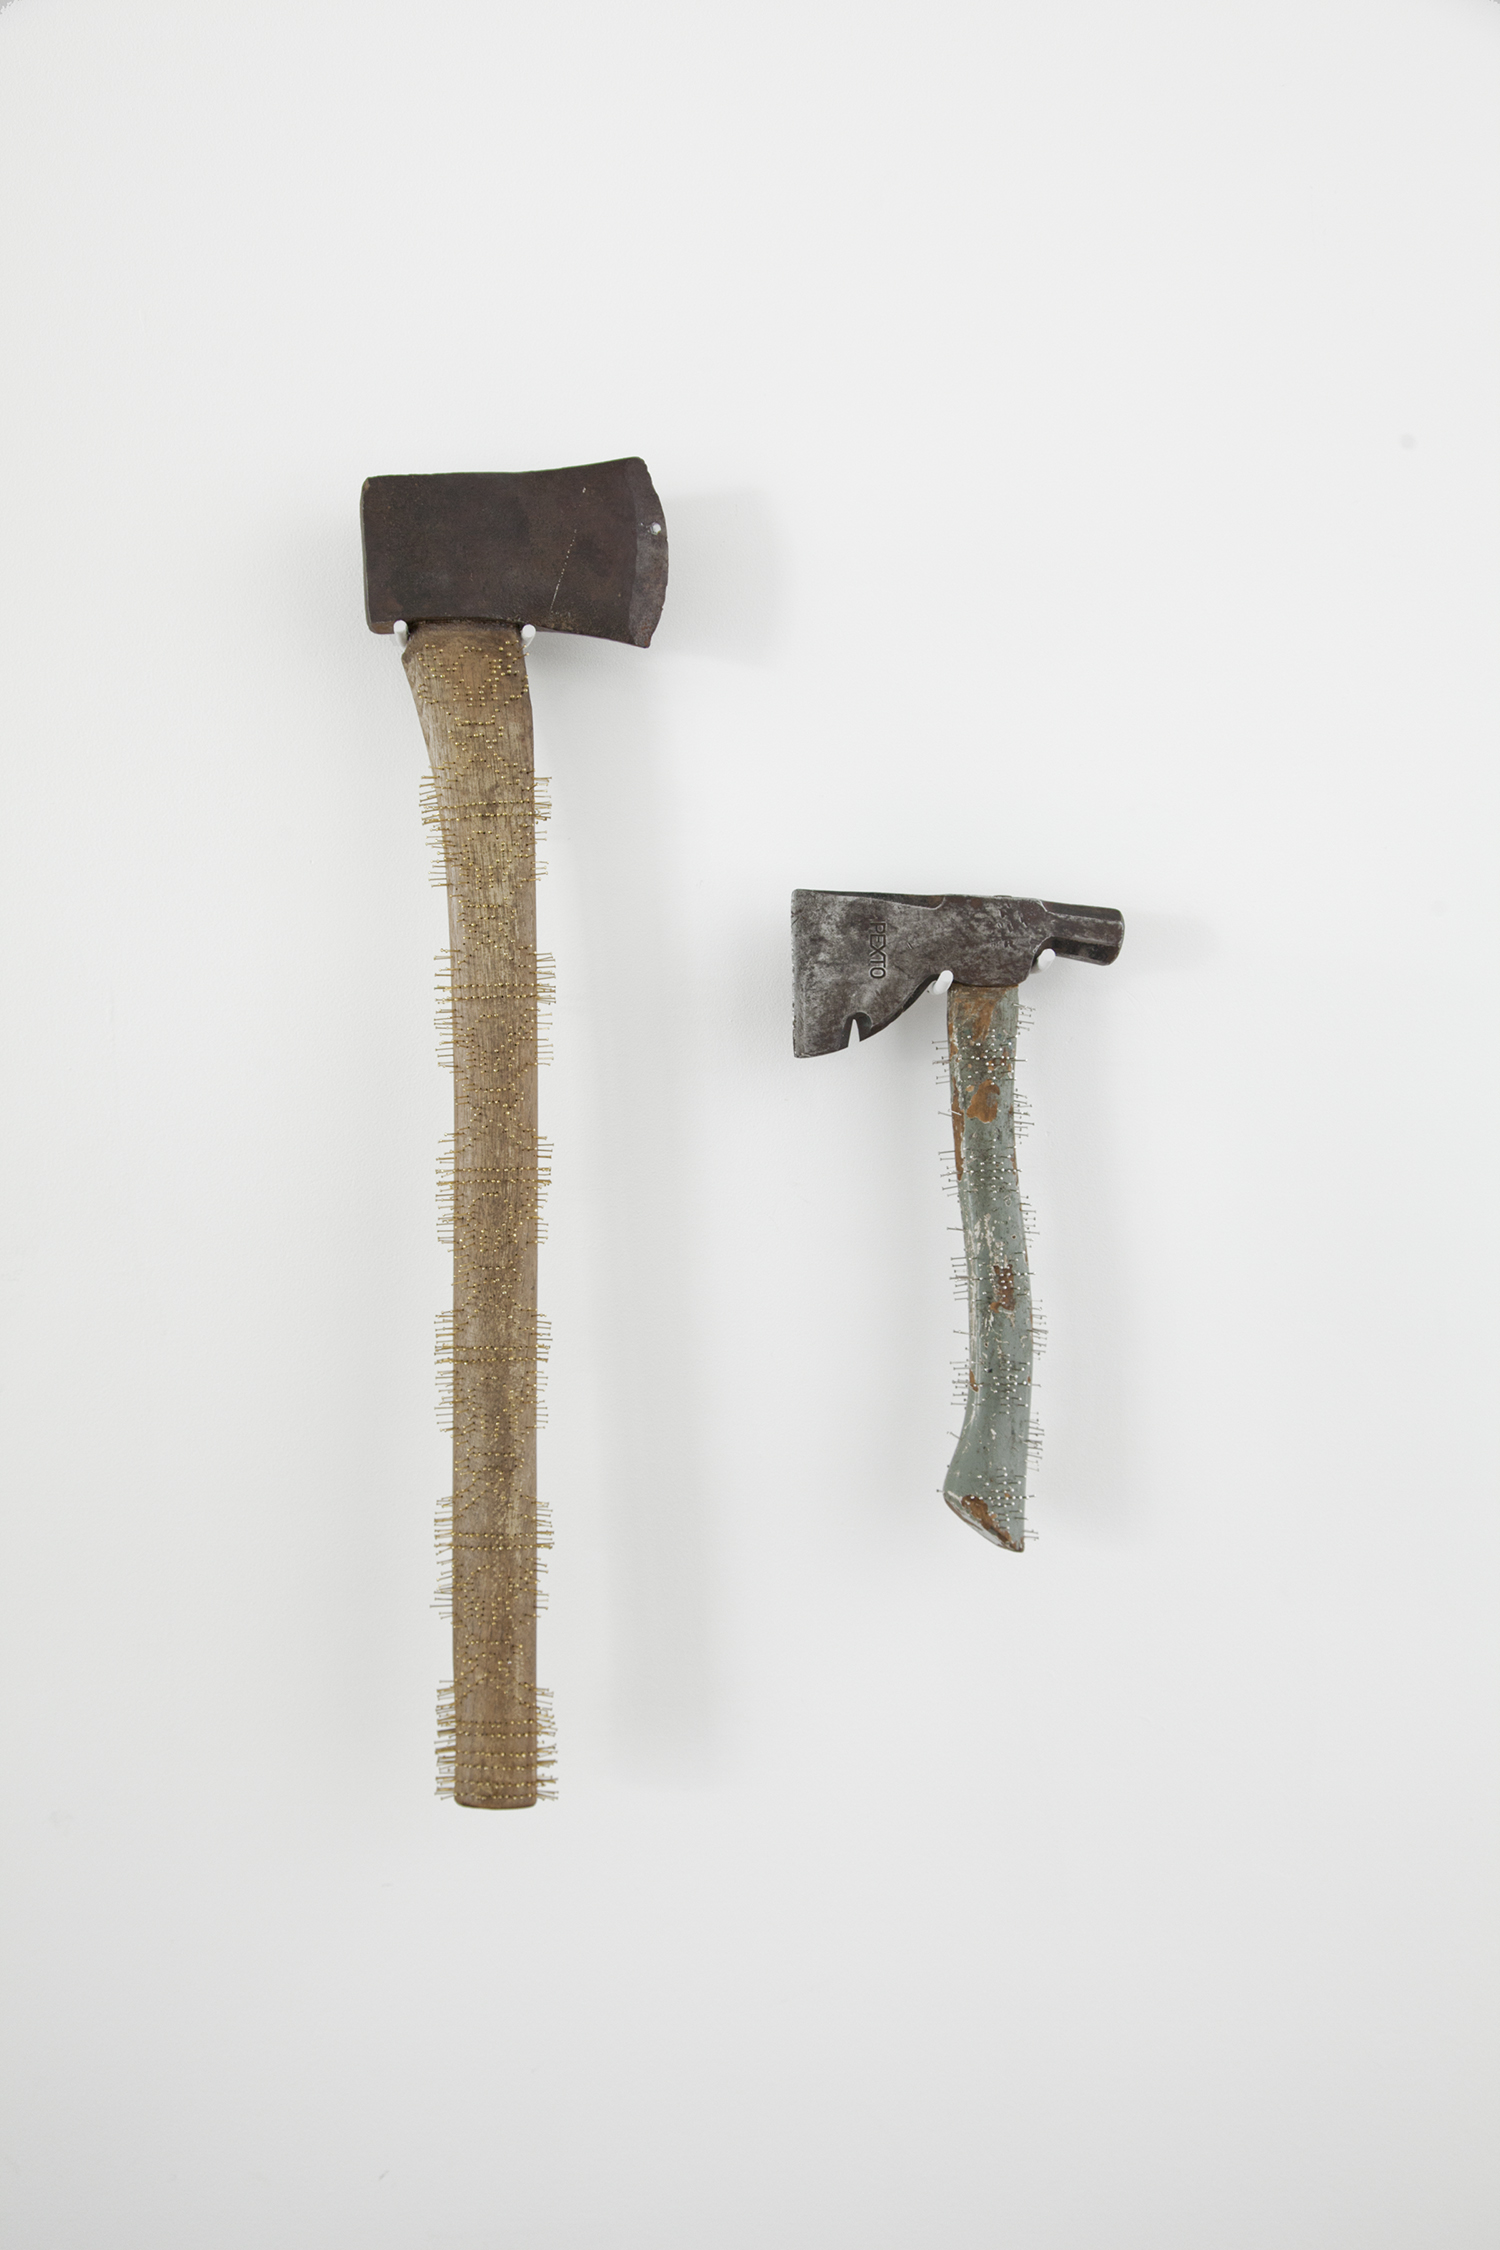   long axe  and  periwinkle axe  2017 found axes, straight pins 24 x 6 x 1.5 inches and 12 x 6.5 x 1.5 inches  